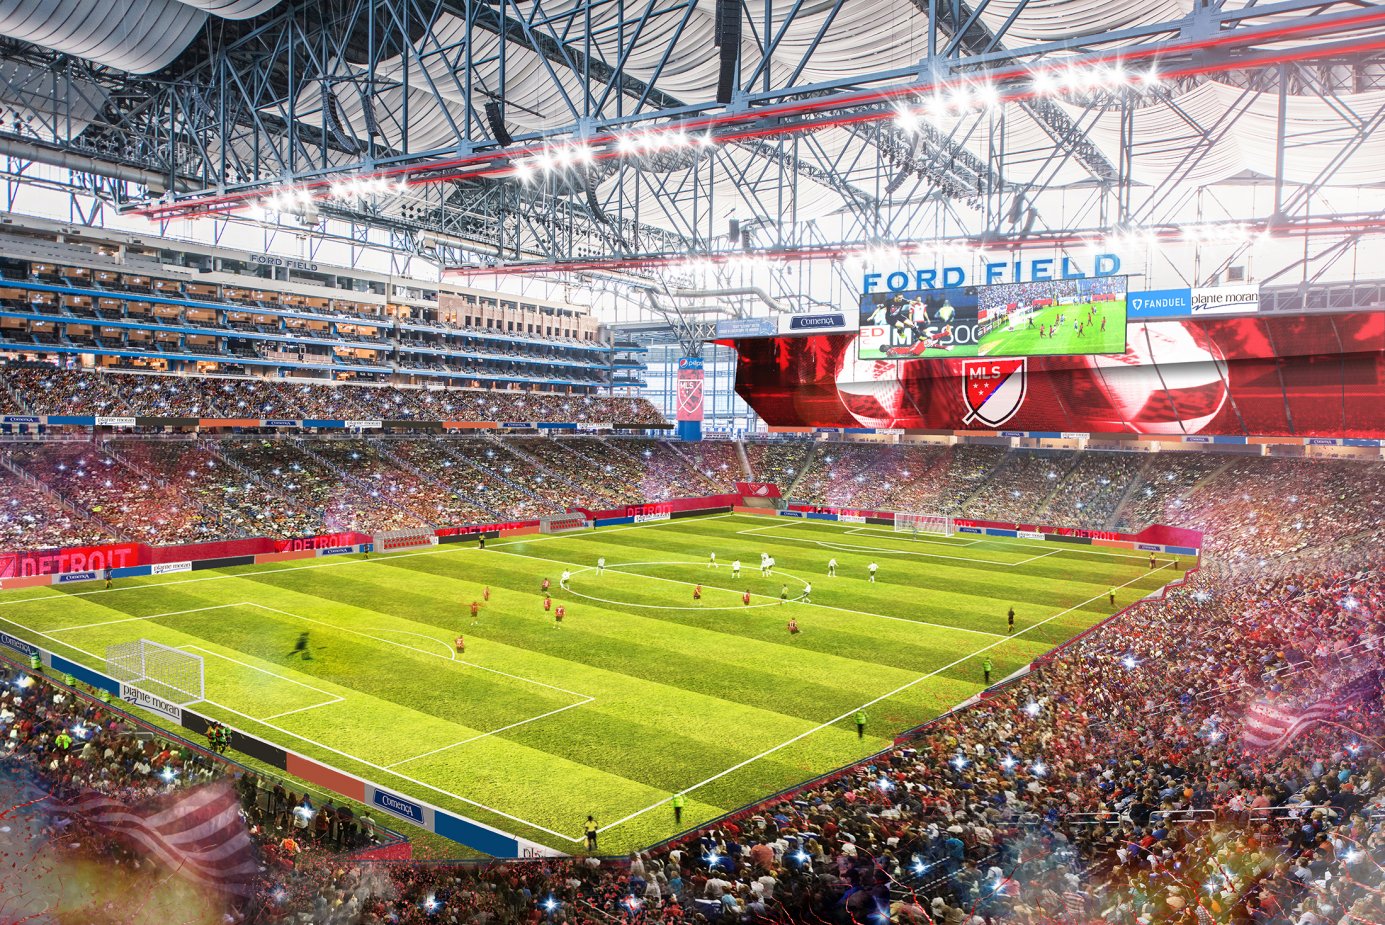 Ford Field Retractable Roof Proposal Being Studied - Soccer Stadium Digest